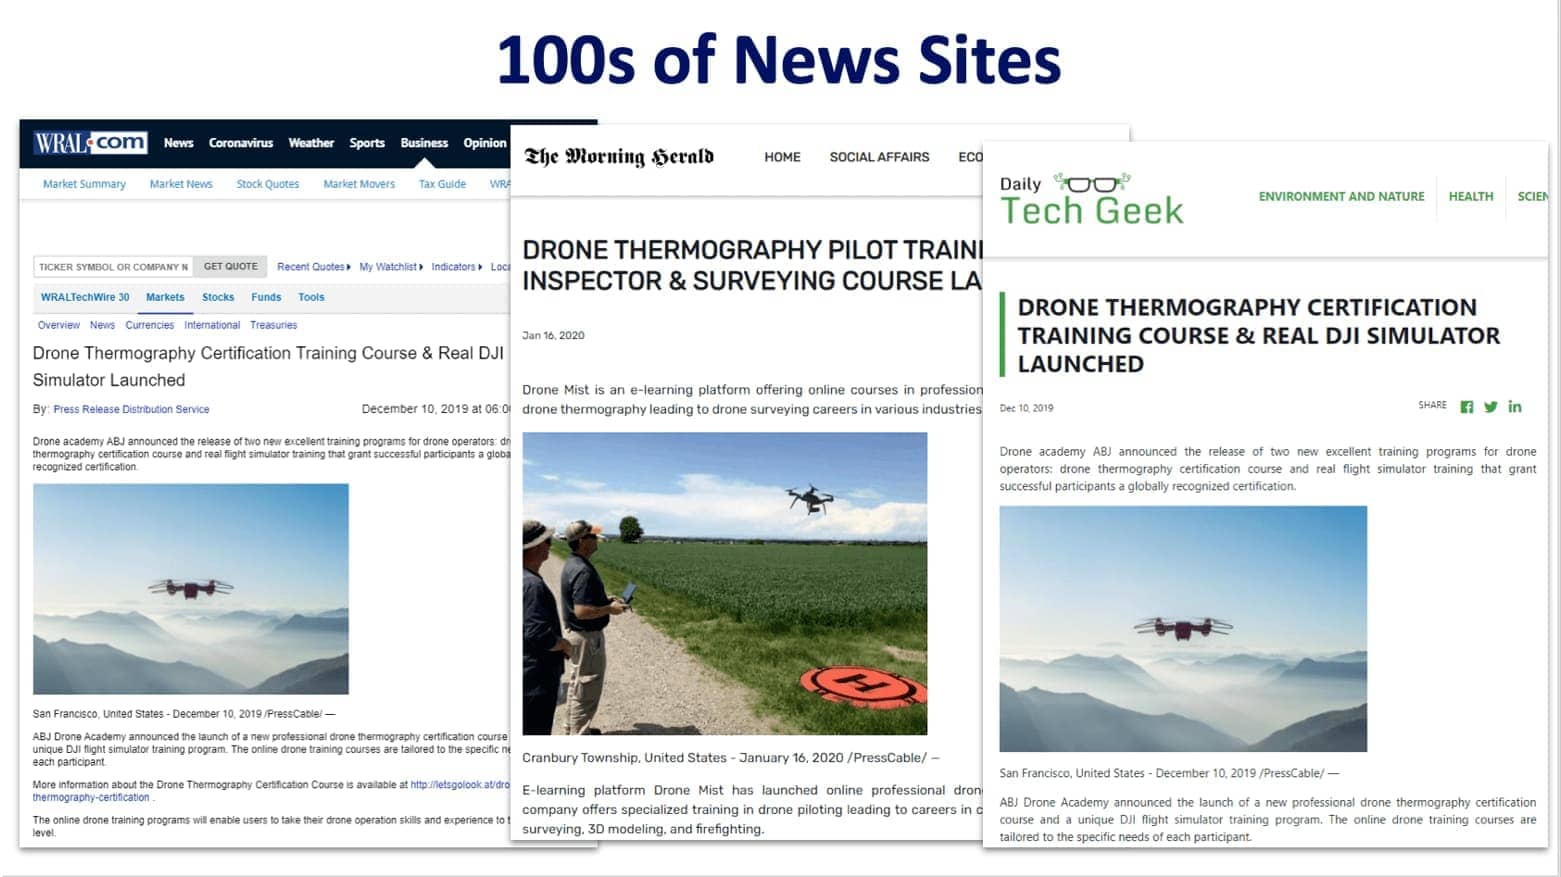 100s of new sites show an omnipresence media campaign